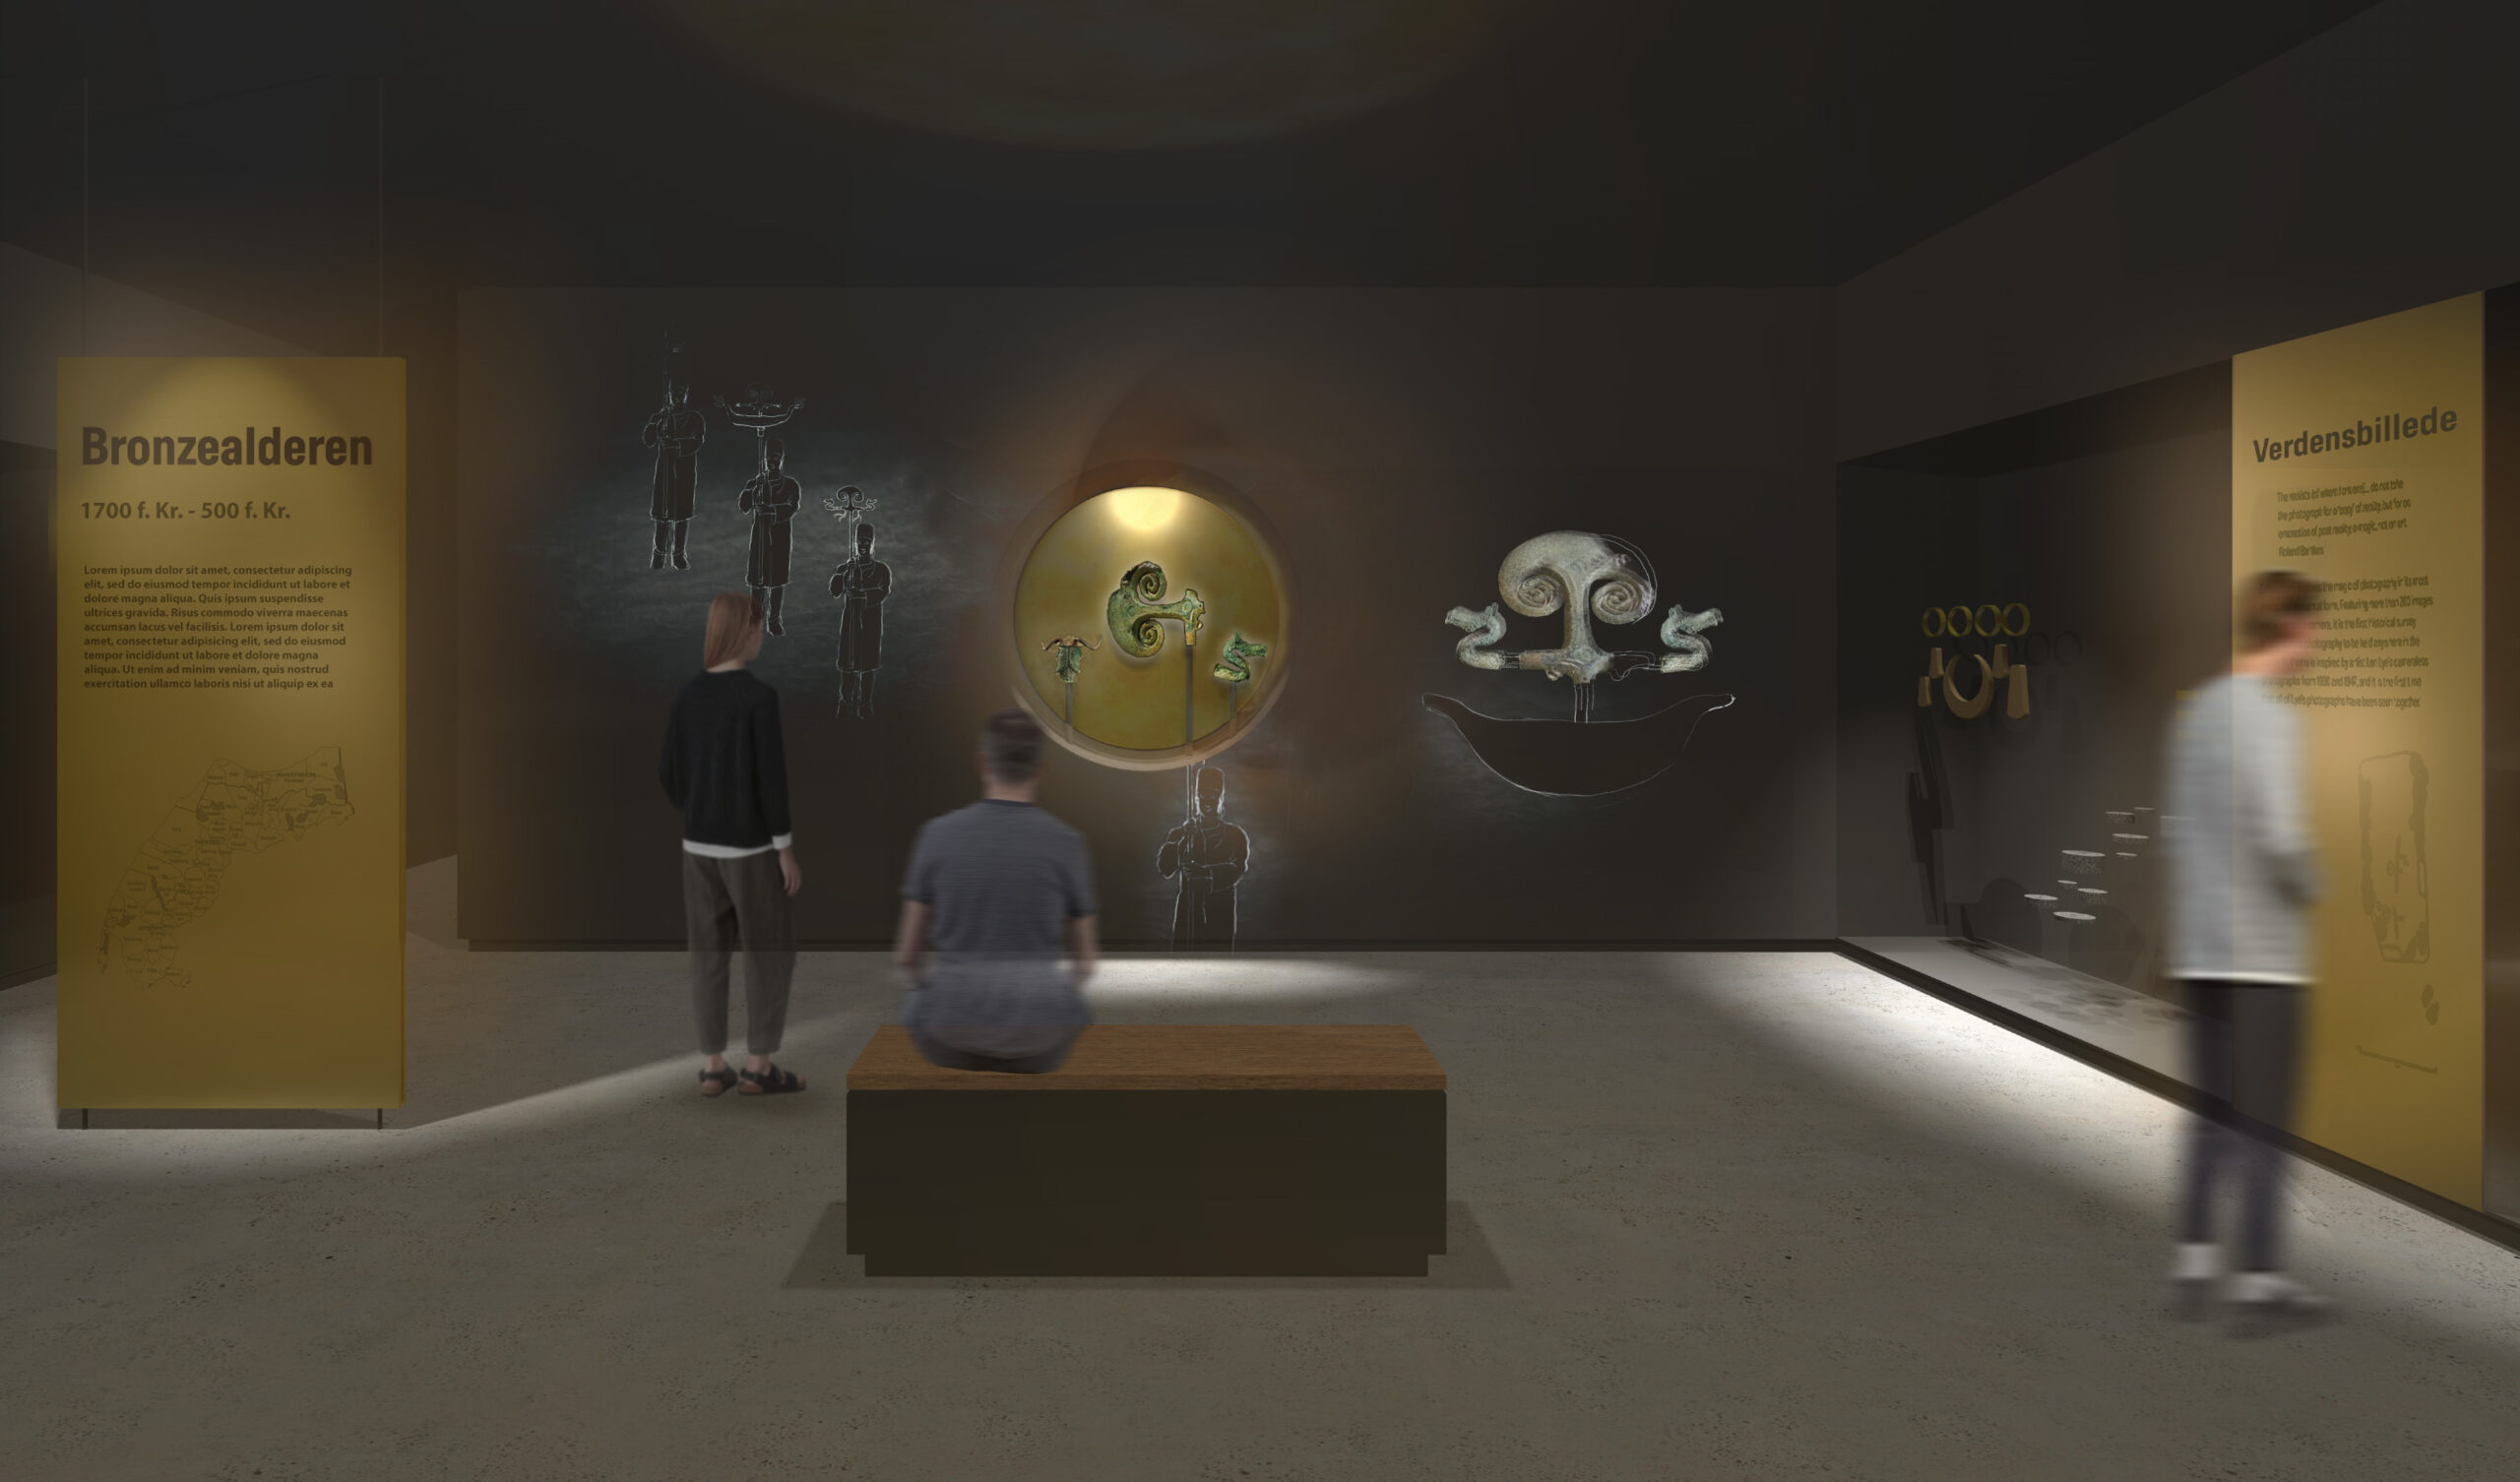 Nyt Thisted Museum exhibition showcases Heijmerink Wagemakers